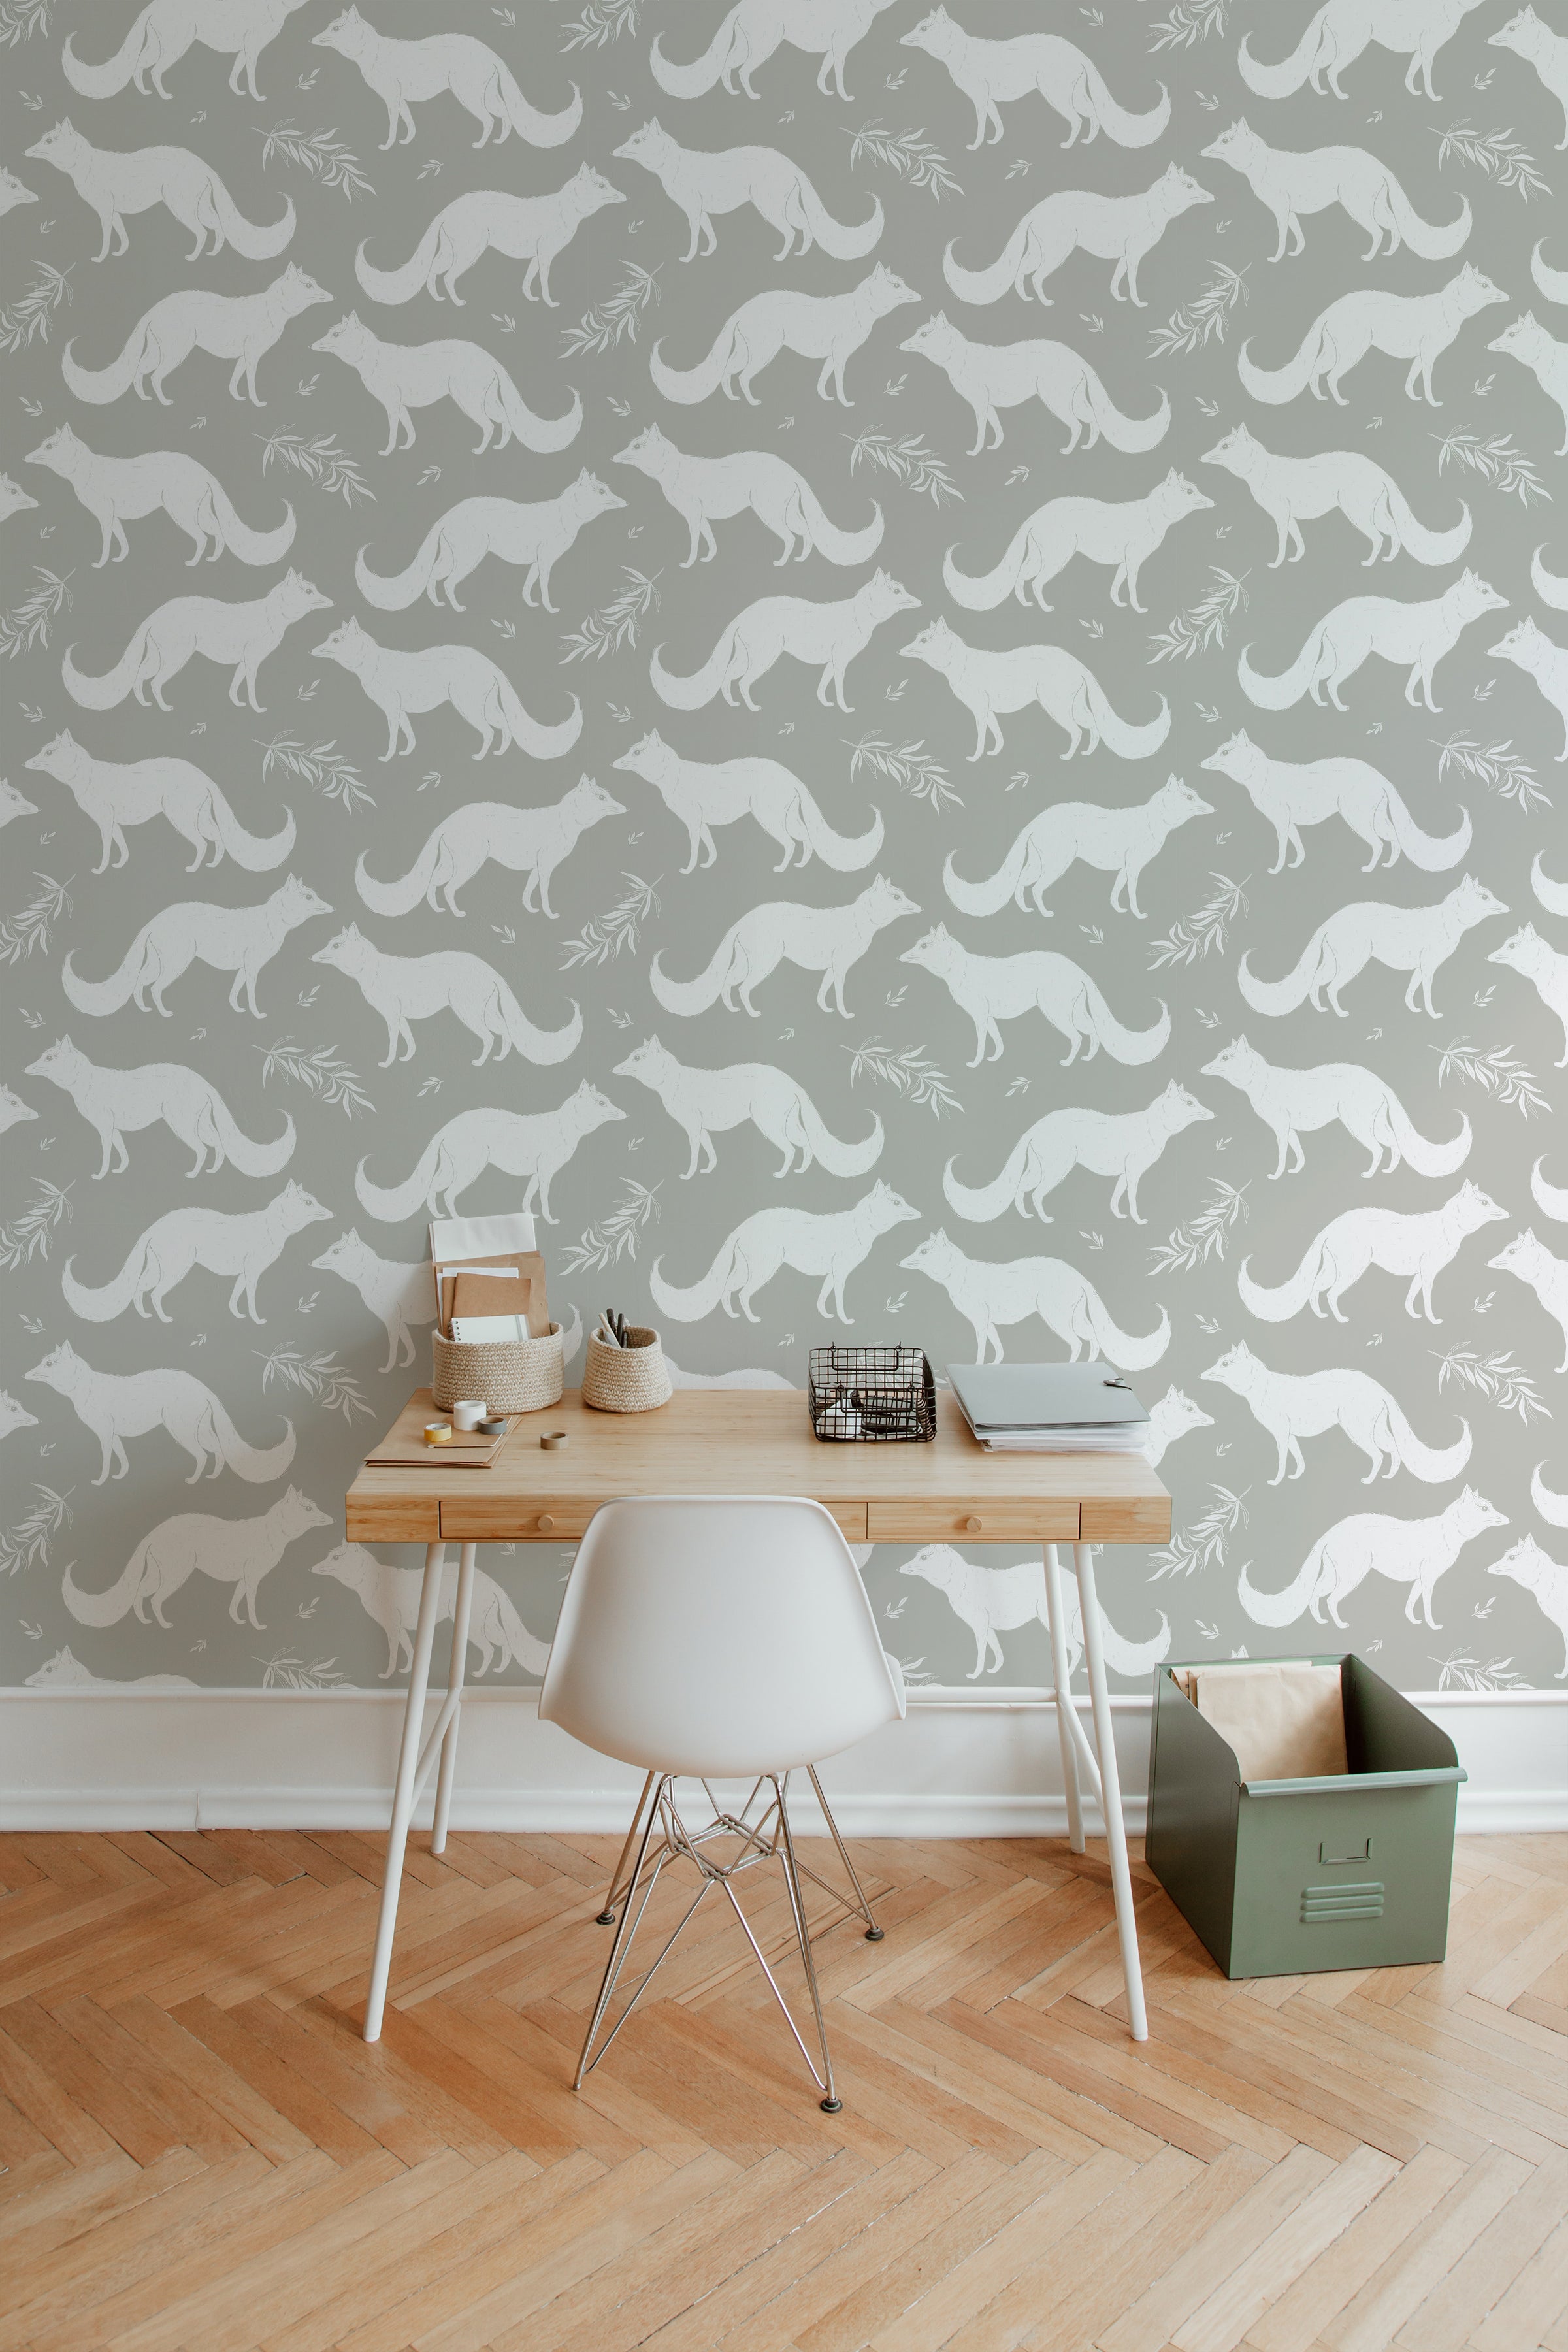 A home office with a light wooden desk and white chair placed against a muted green wallpaper adorned with a pattern of white foxes and delicate foliage, creating a calm and serene workspace